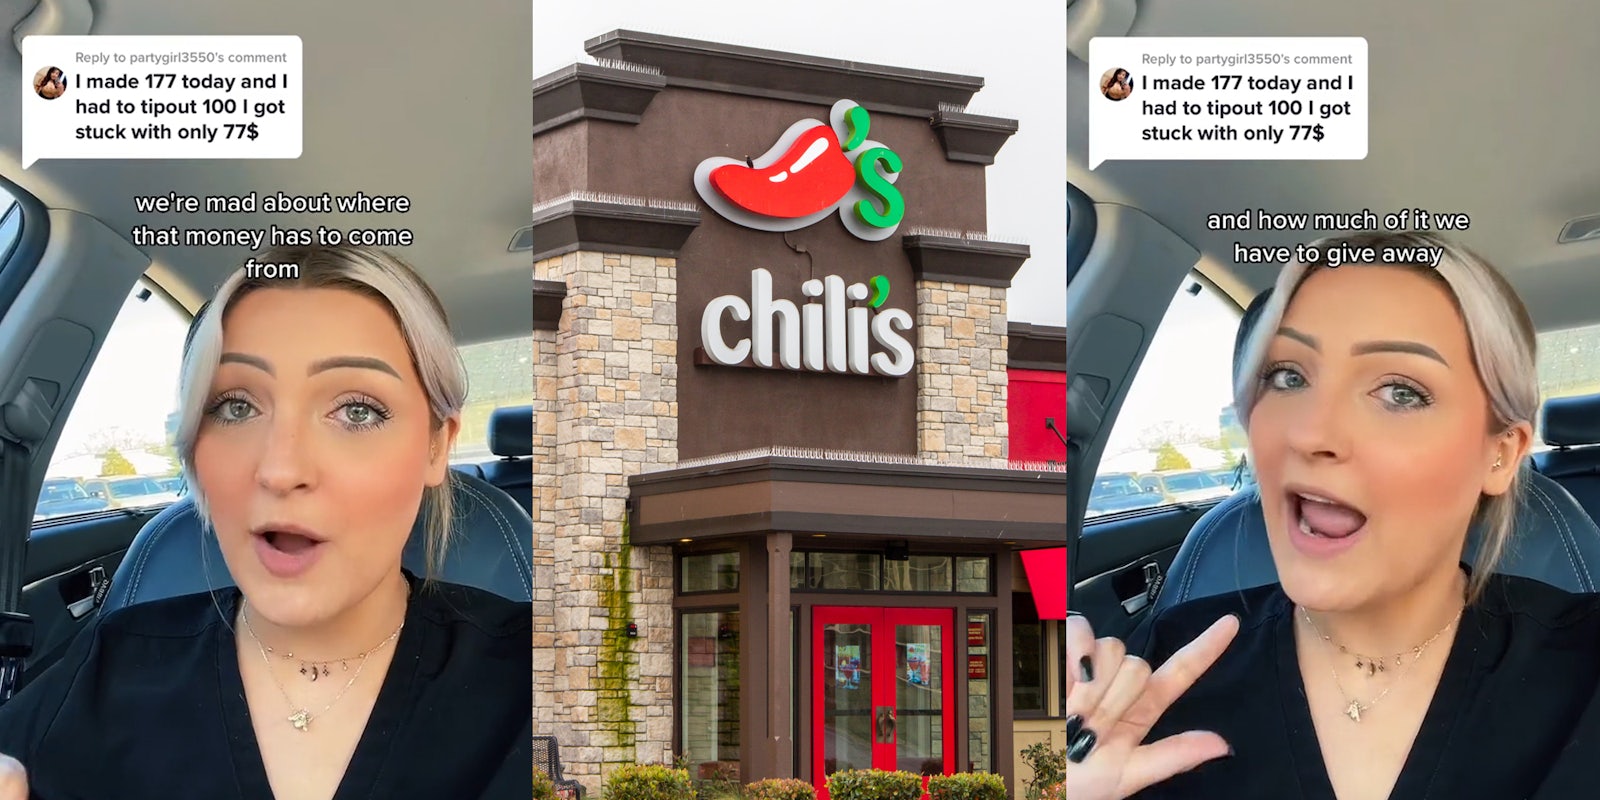 Chili's employee speaking in car with caption 'I made 177 today and I had to tipout 100 I got stuck with only $77' 'we're mad about where that money has to come ftom' (l) Chili's building with sign (c) Chili's employee speaking in car with caption 'I made 177 today and I had to tipout 100 I got stuck with only $77' 'and how much of it we have to give away' (r)